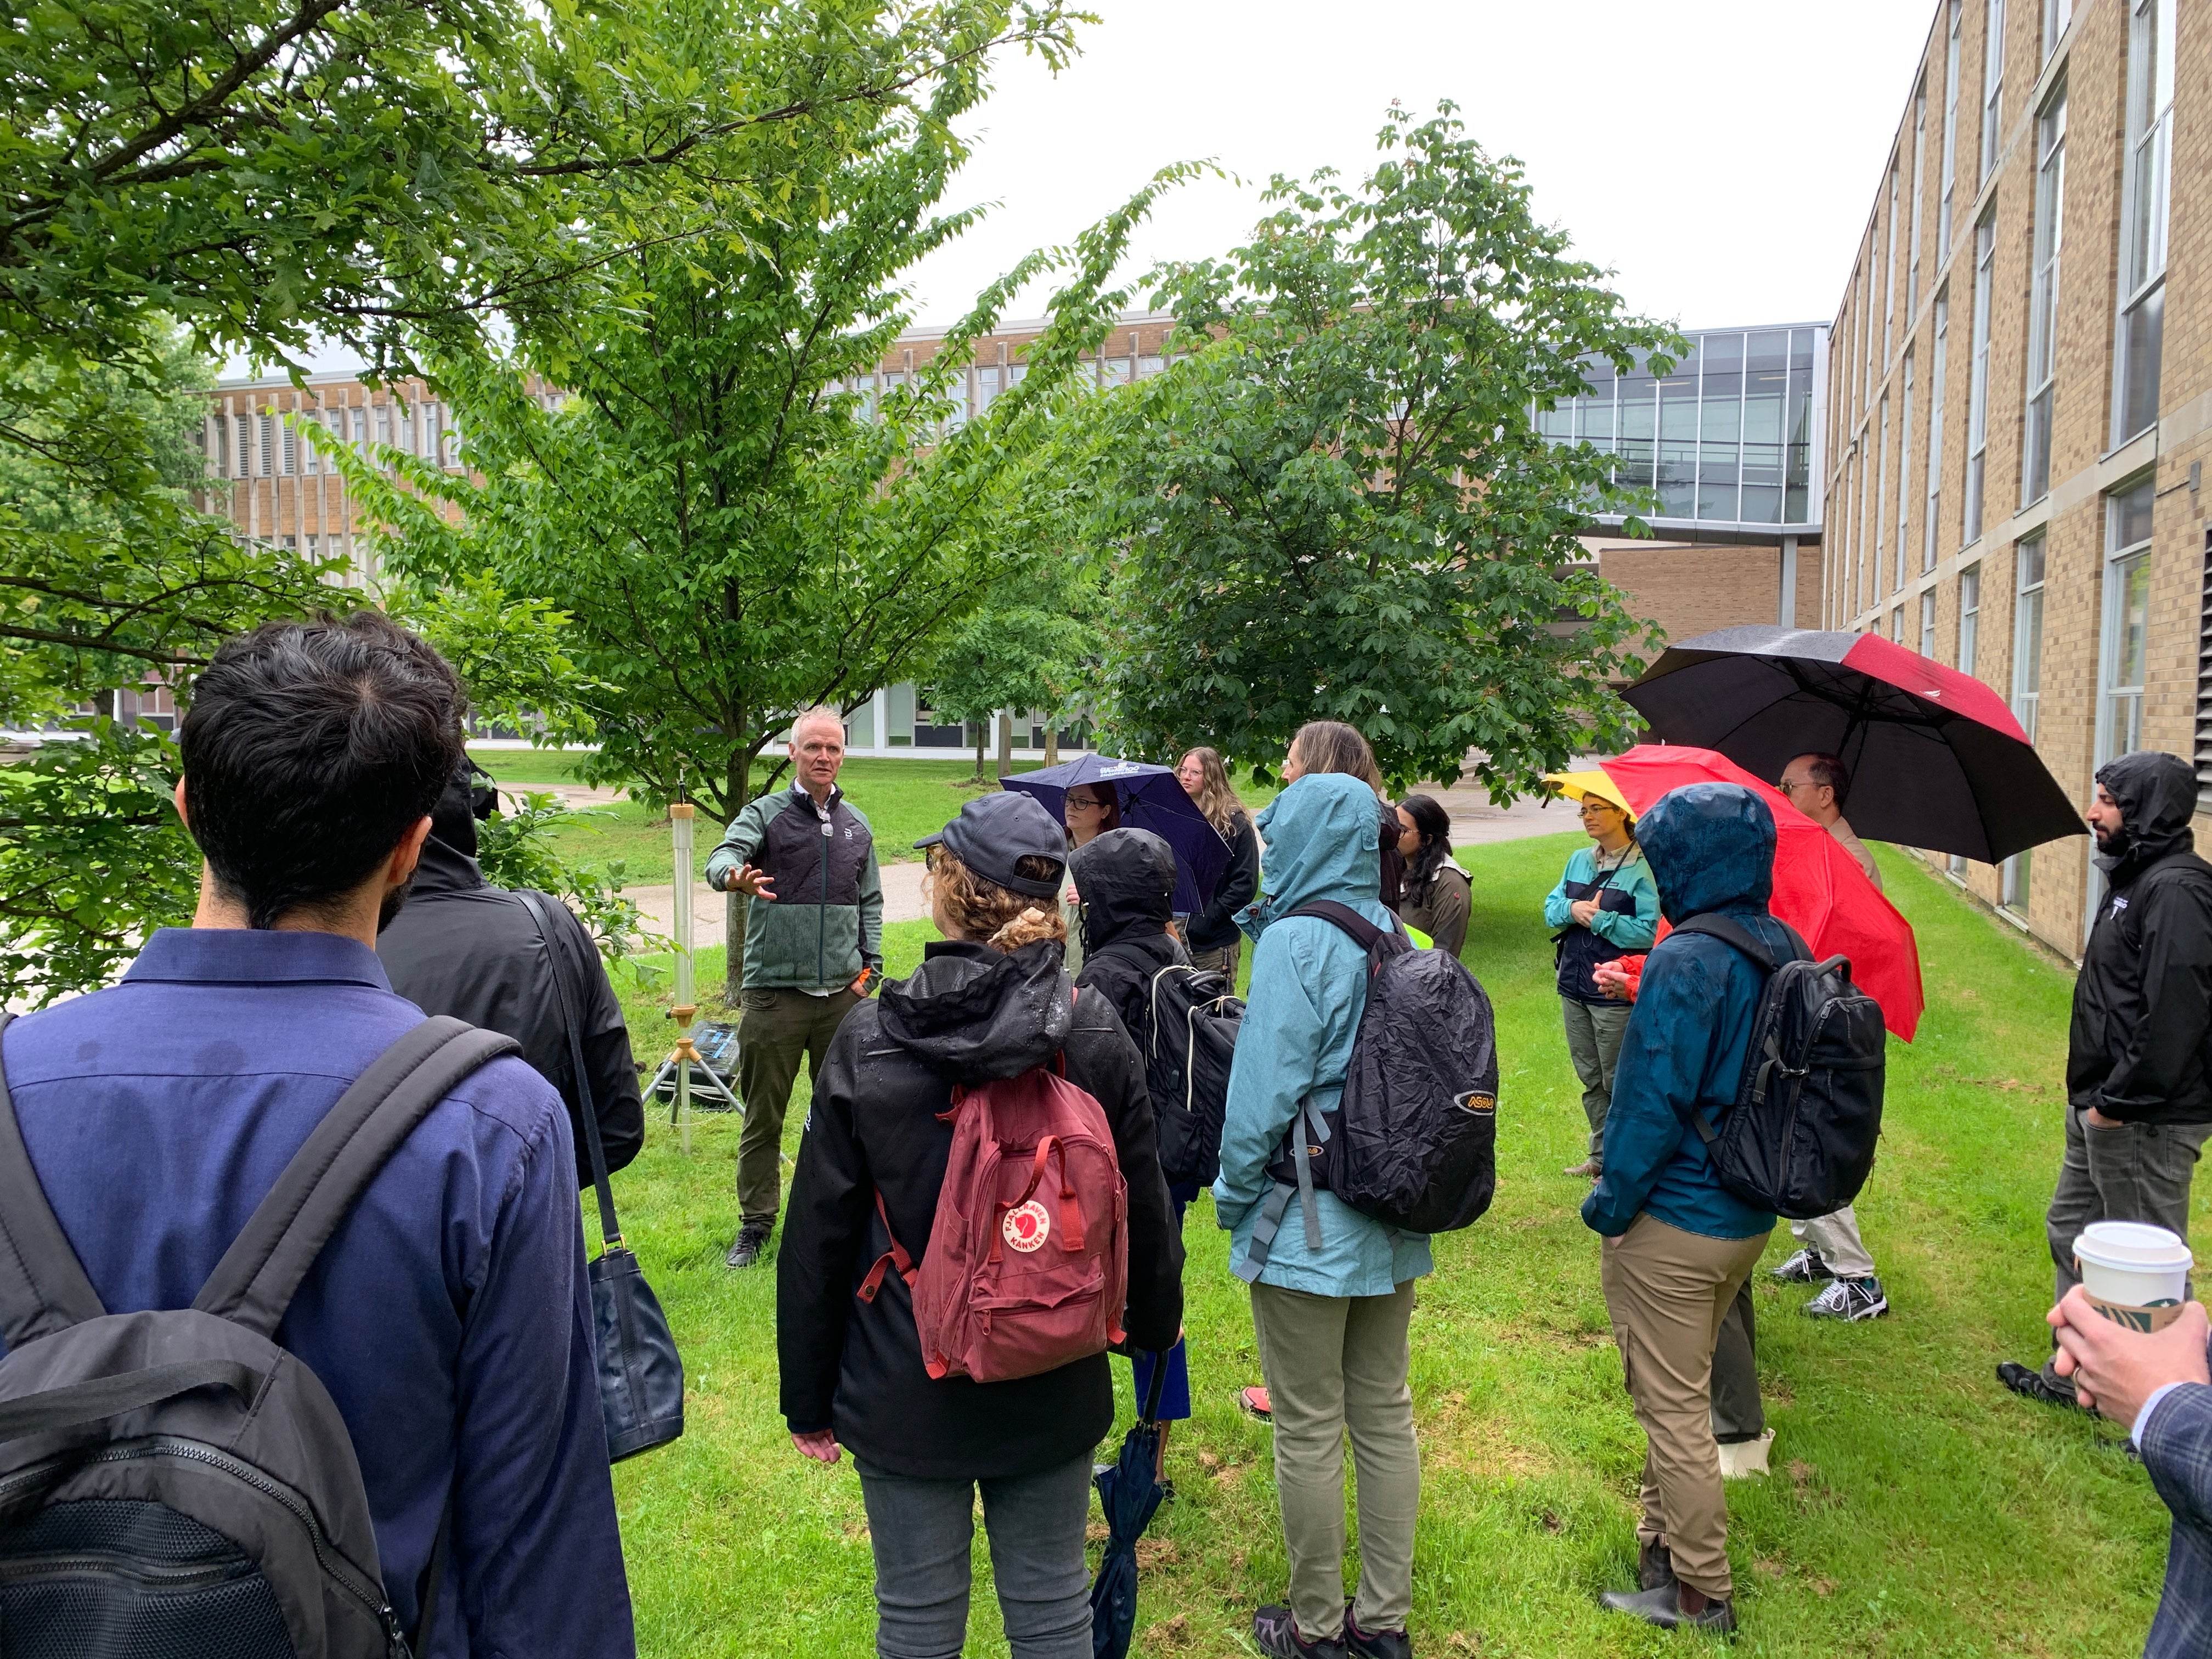 Participants observing the stormwater hydrology demonstration on campus.